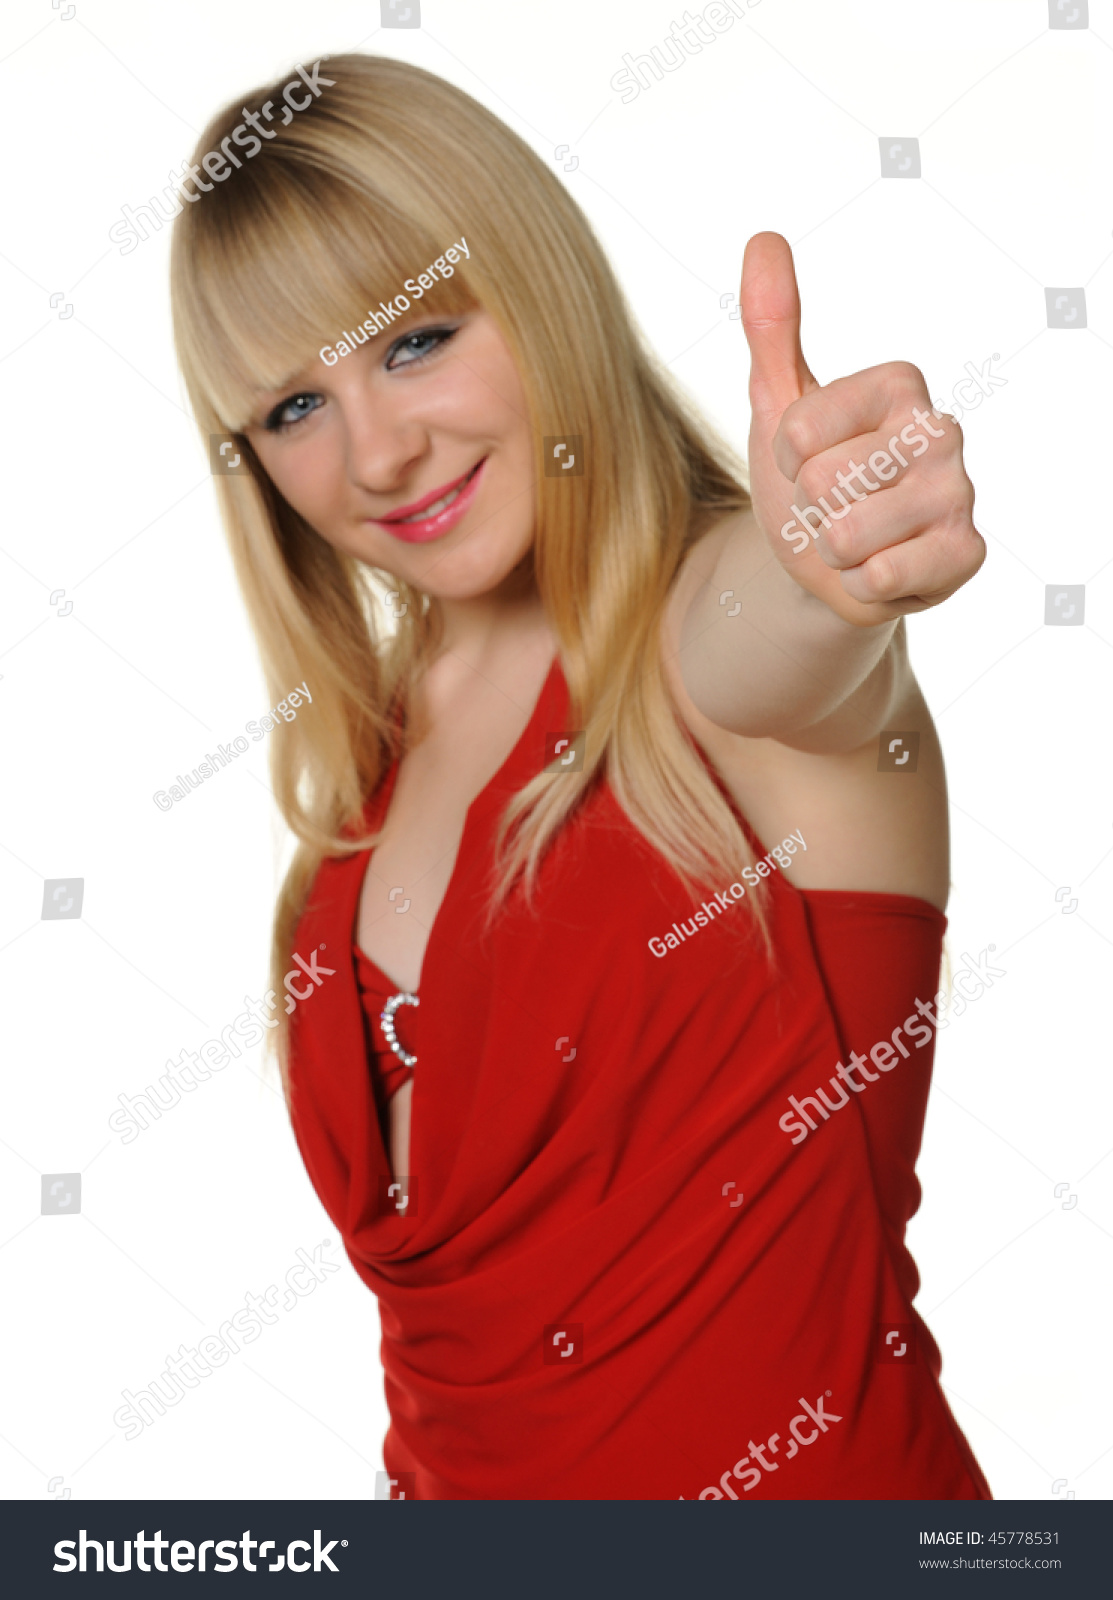 The Girl Thumbs Up Reaction Of Approval It Is Isolated On A White